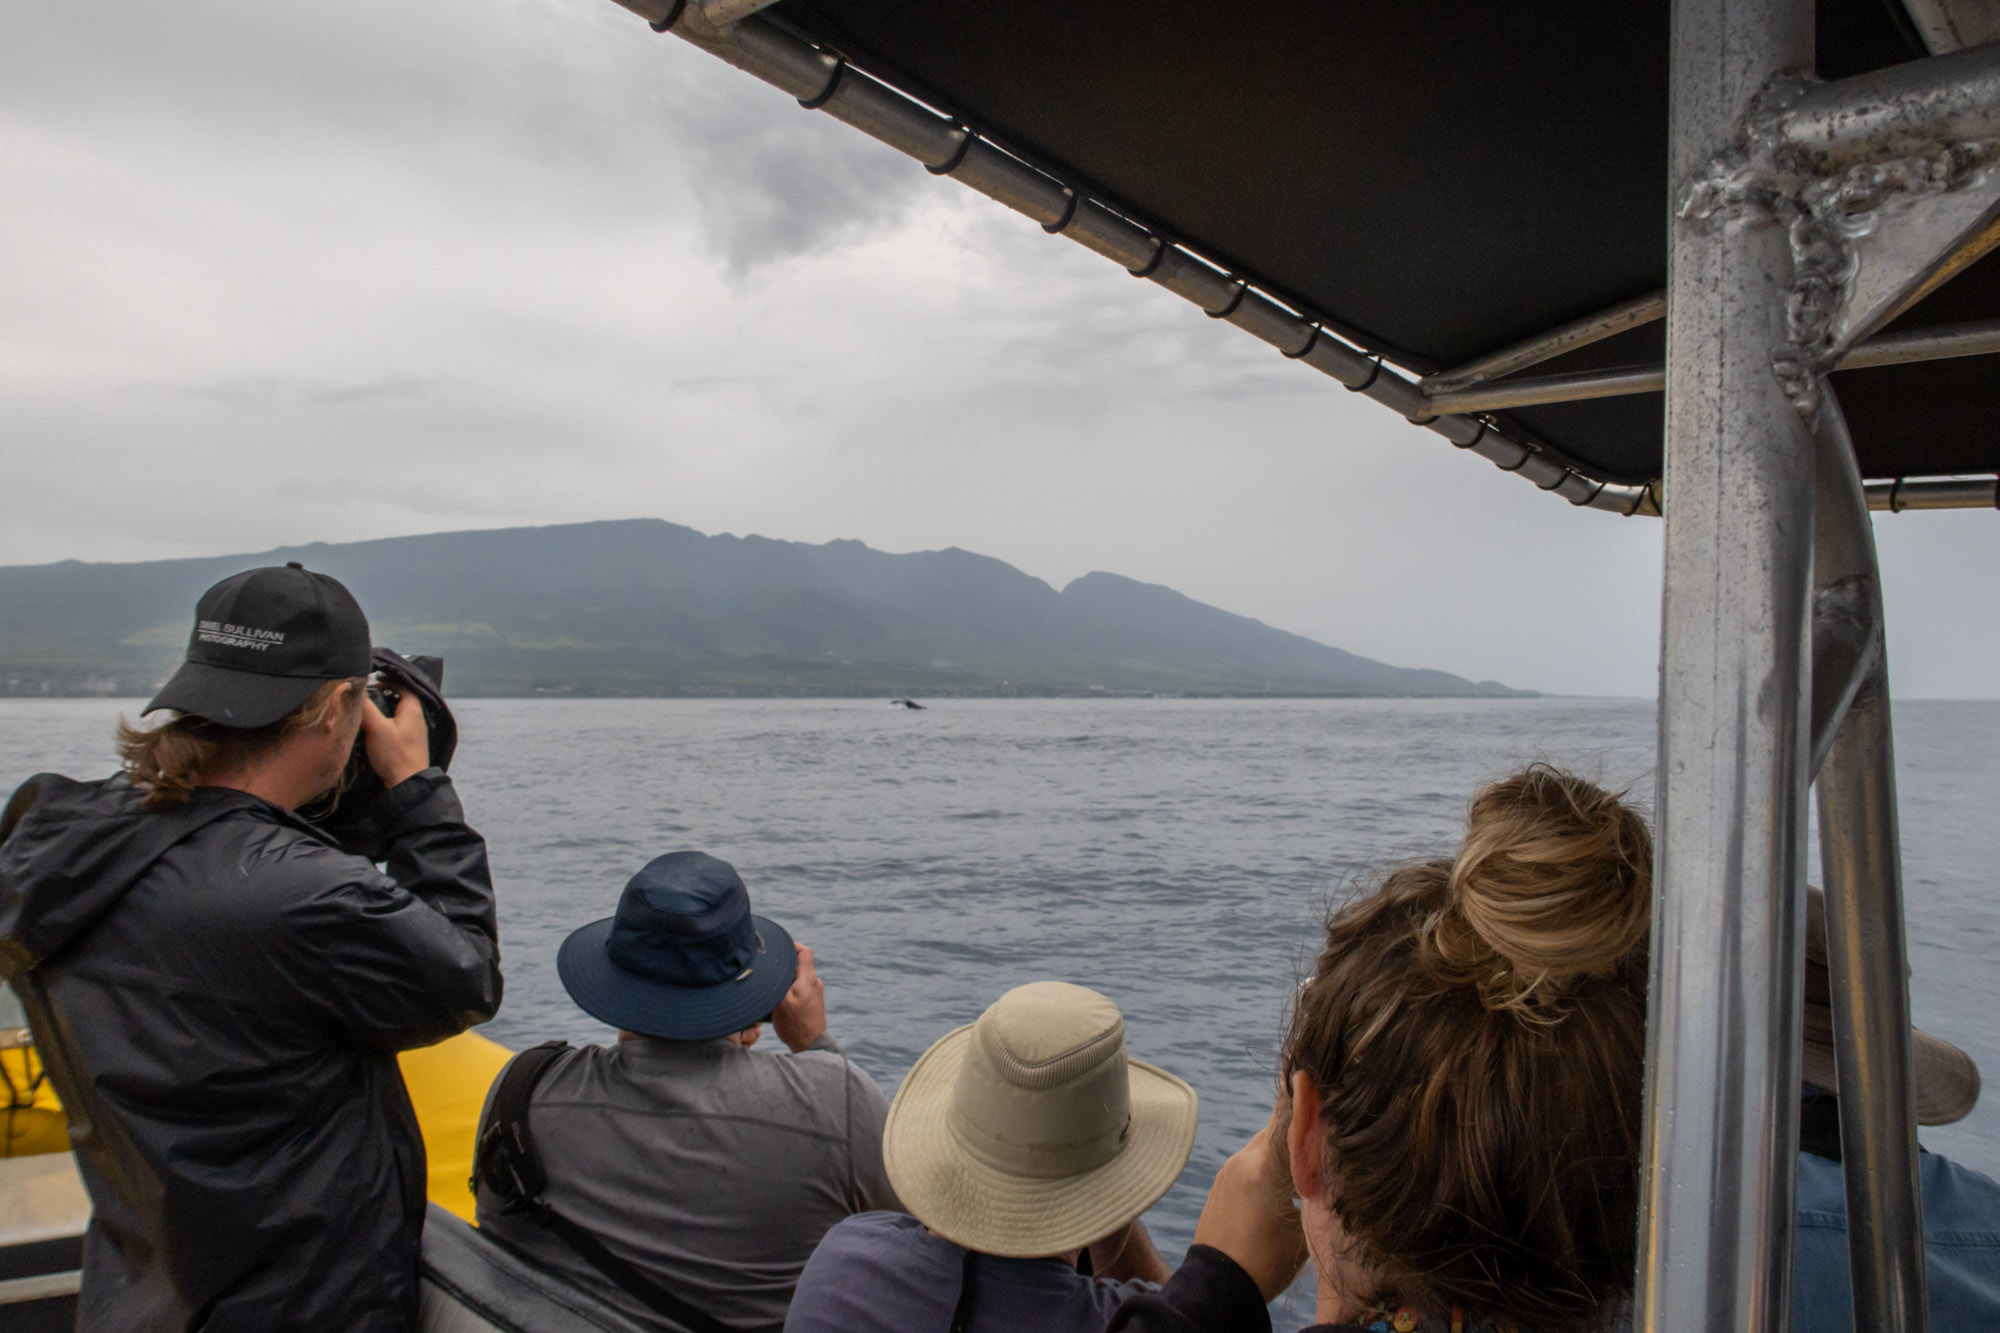 How to see whales in Maui